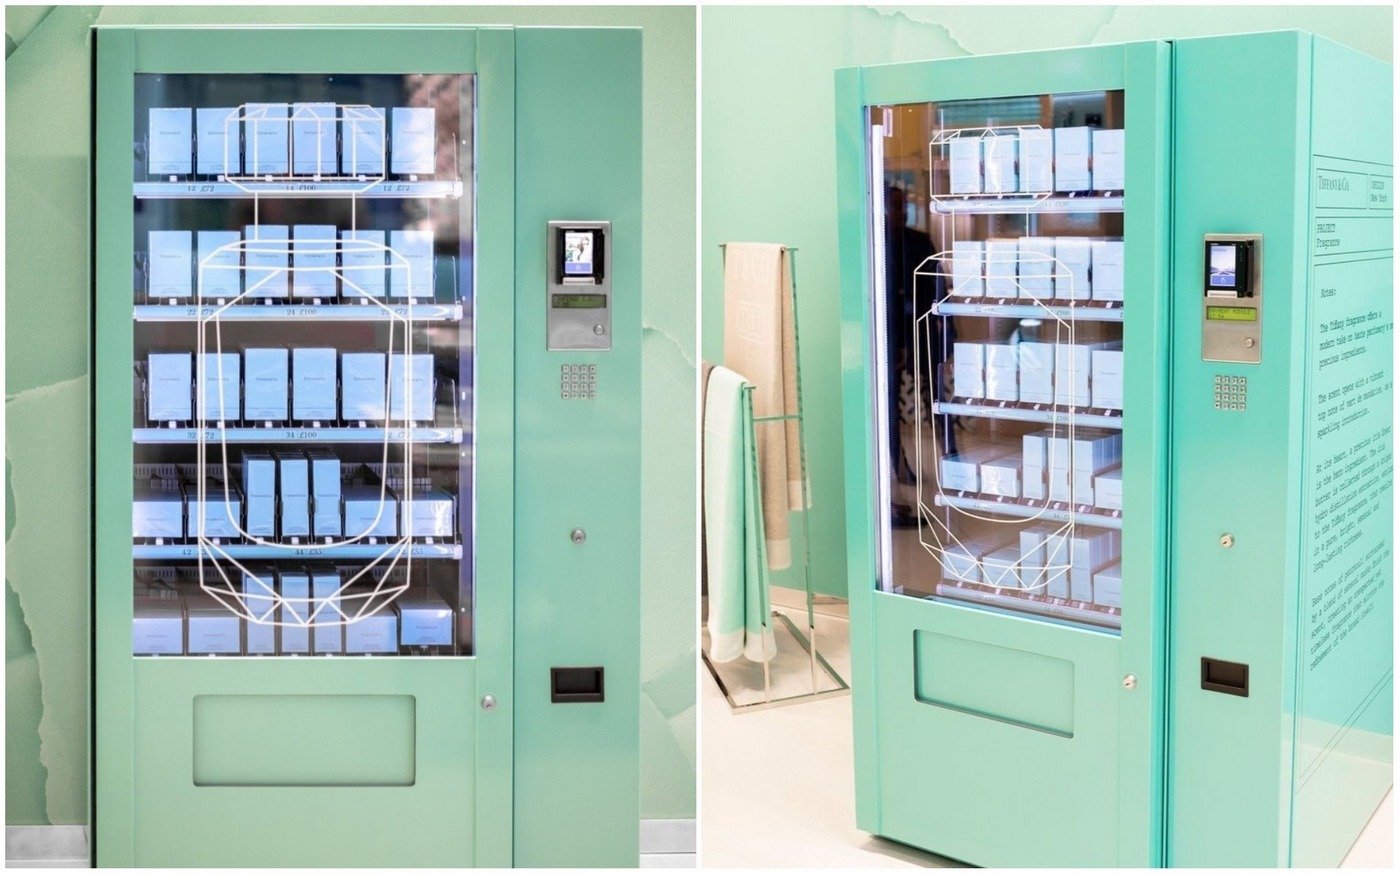 Could this be the worlds most decadent vending machine? (Hint – It’s from Tiffany’s)